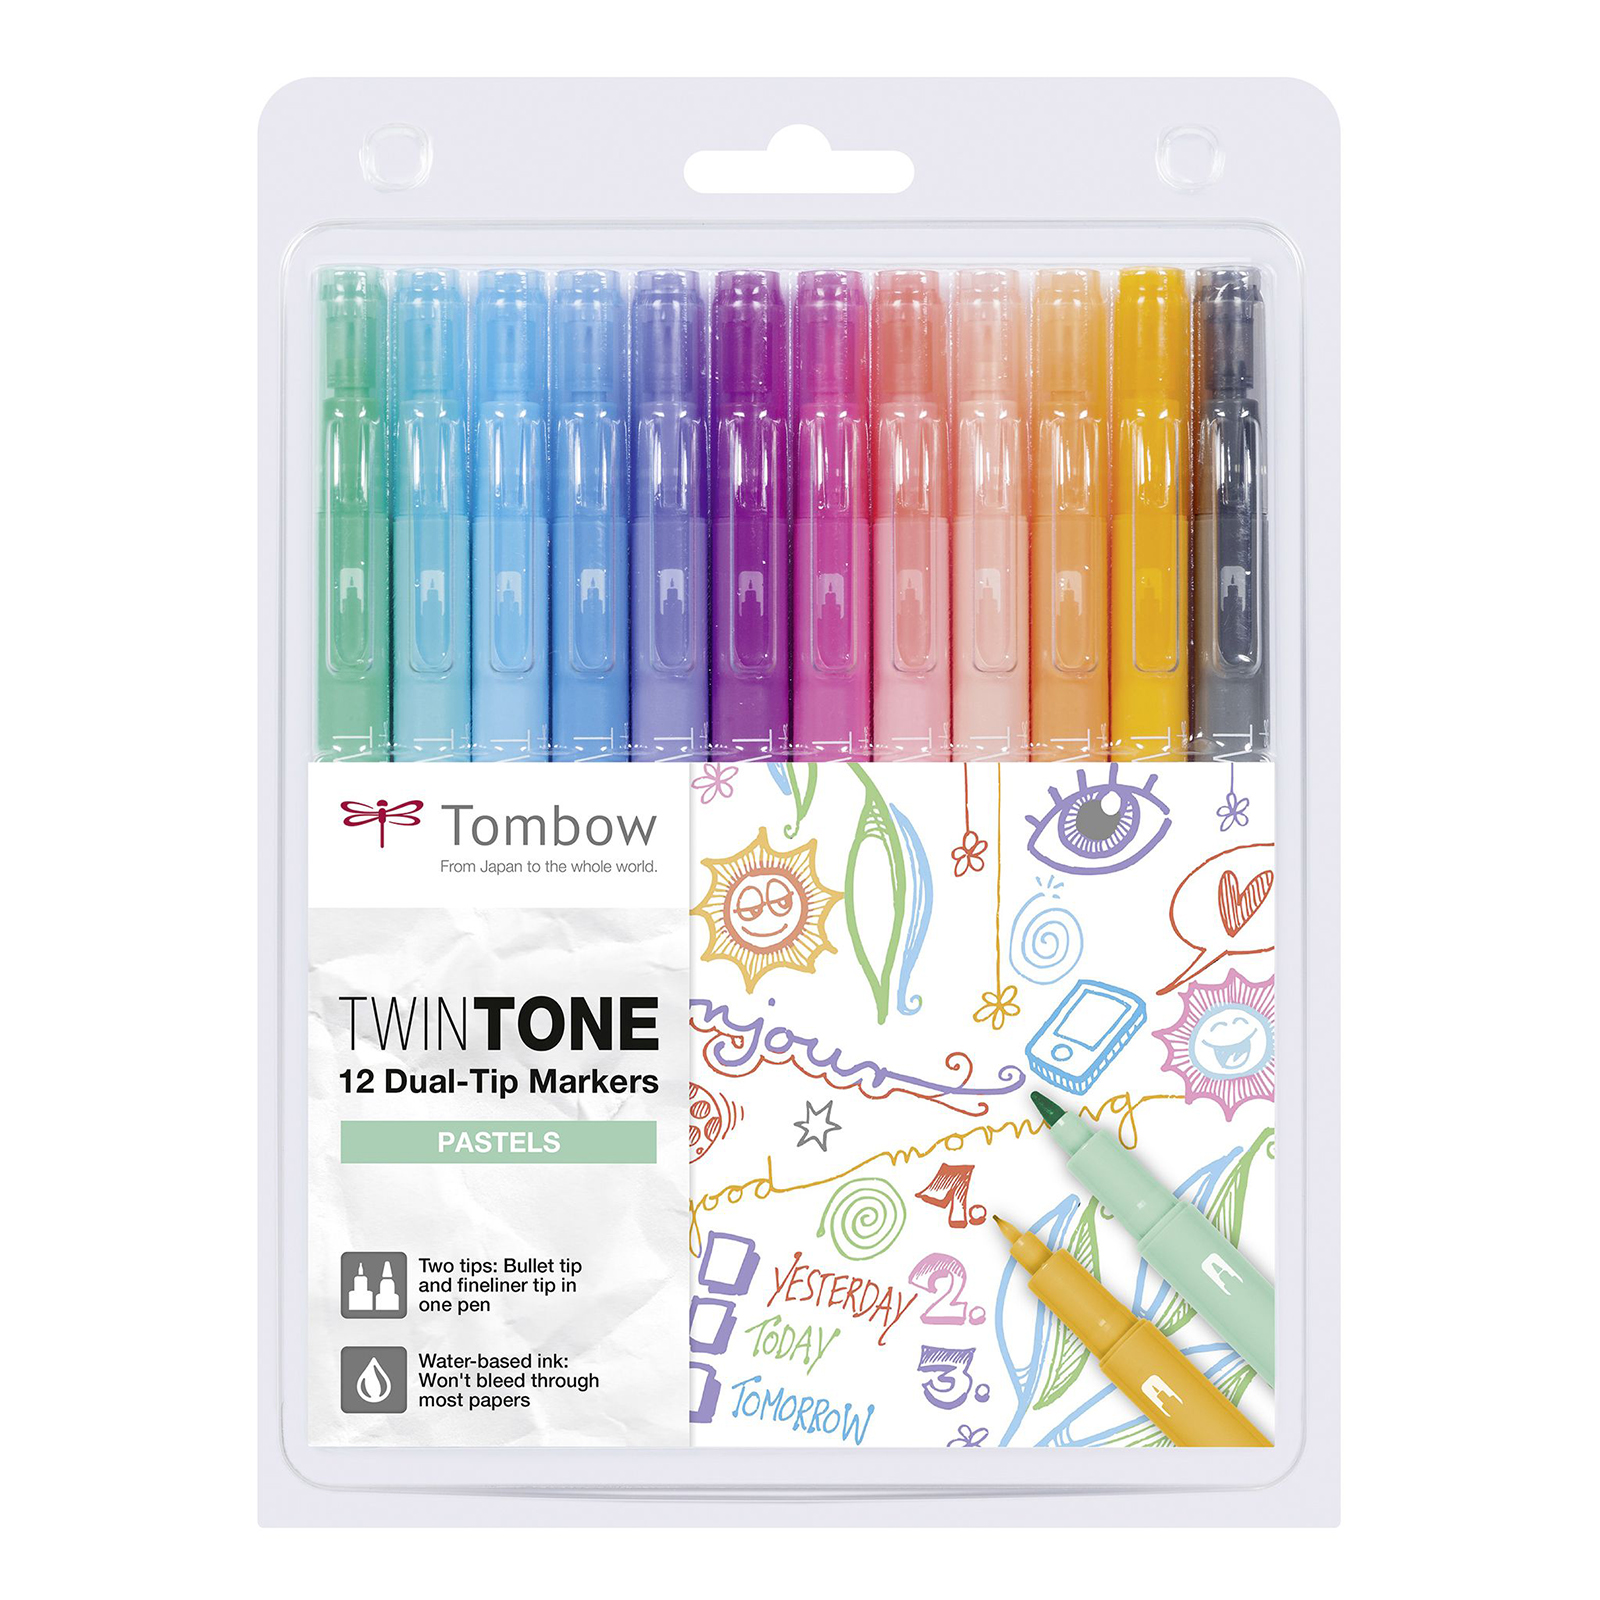 Tombow • Twintone dual-tip markers Pastels 12pcs